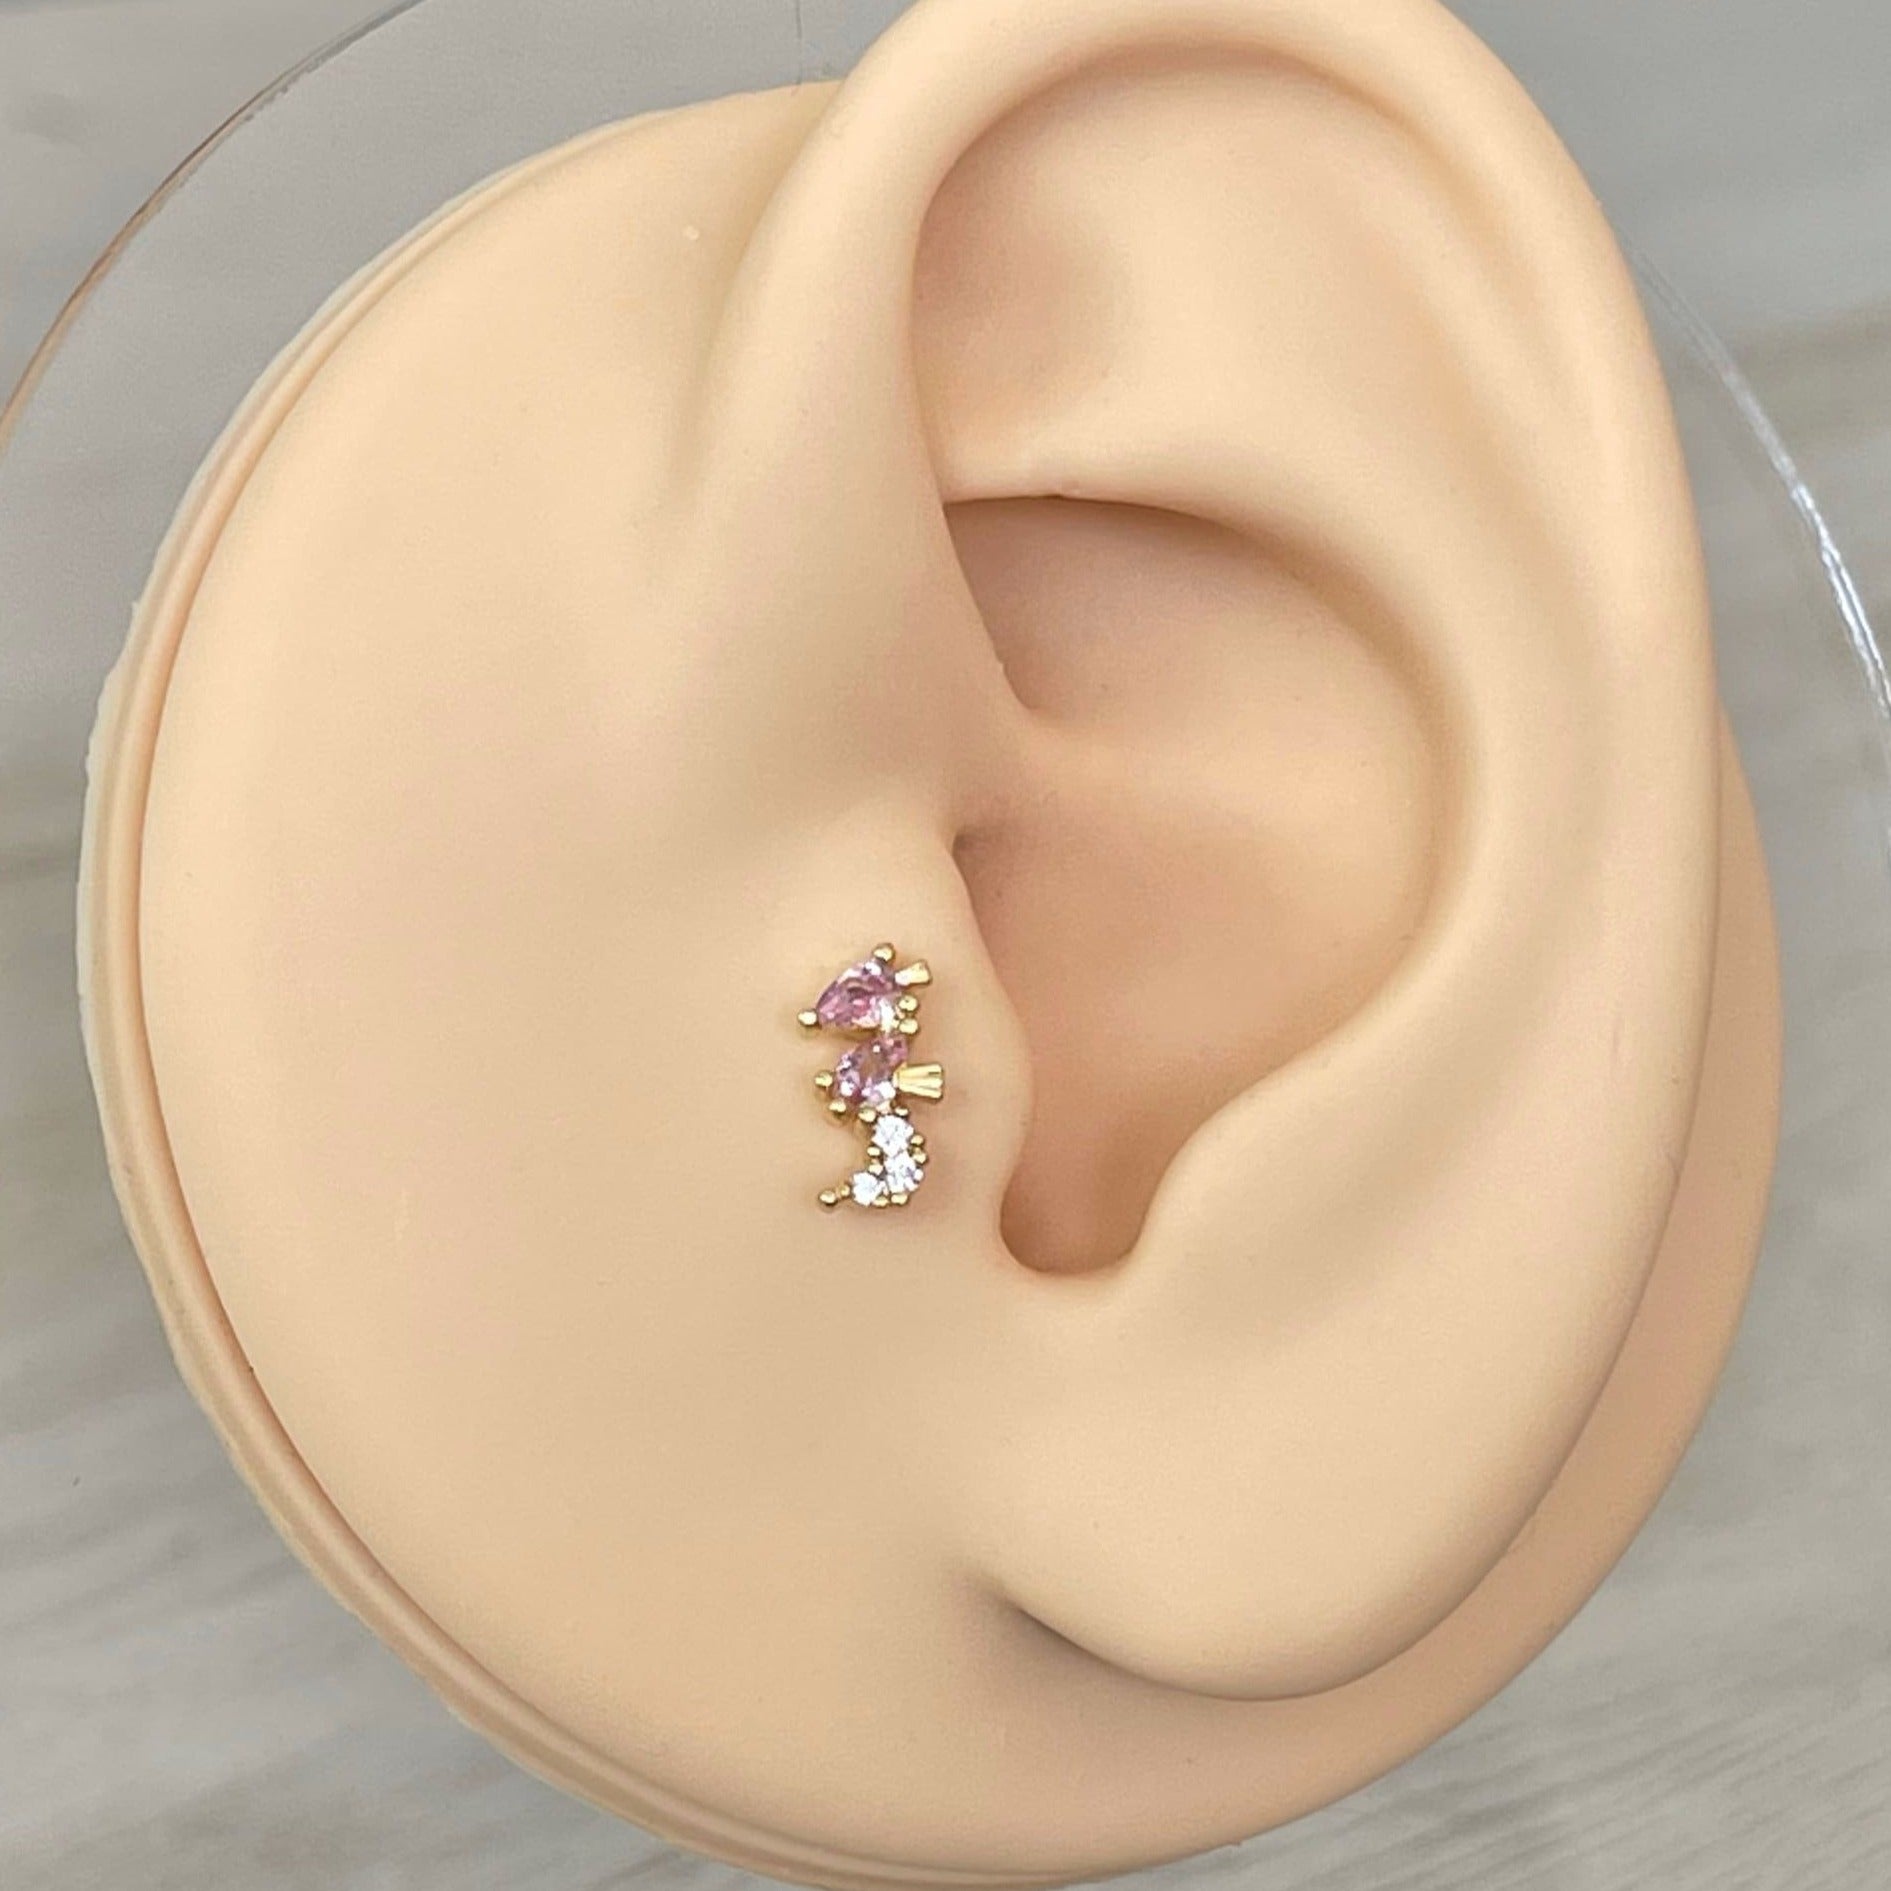 Cute Ocean Themed Stud Piercing (20G | 6mm | Surgical Steel | Silver or Gold | Starfish, Jellyfish, Seahorse, or Crab))